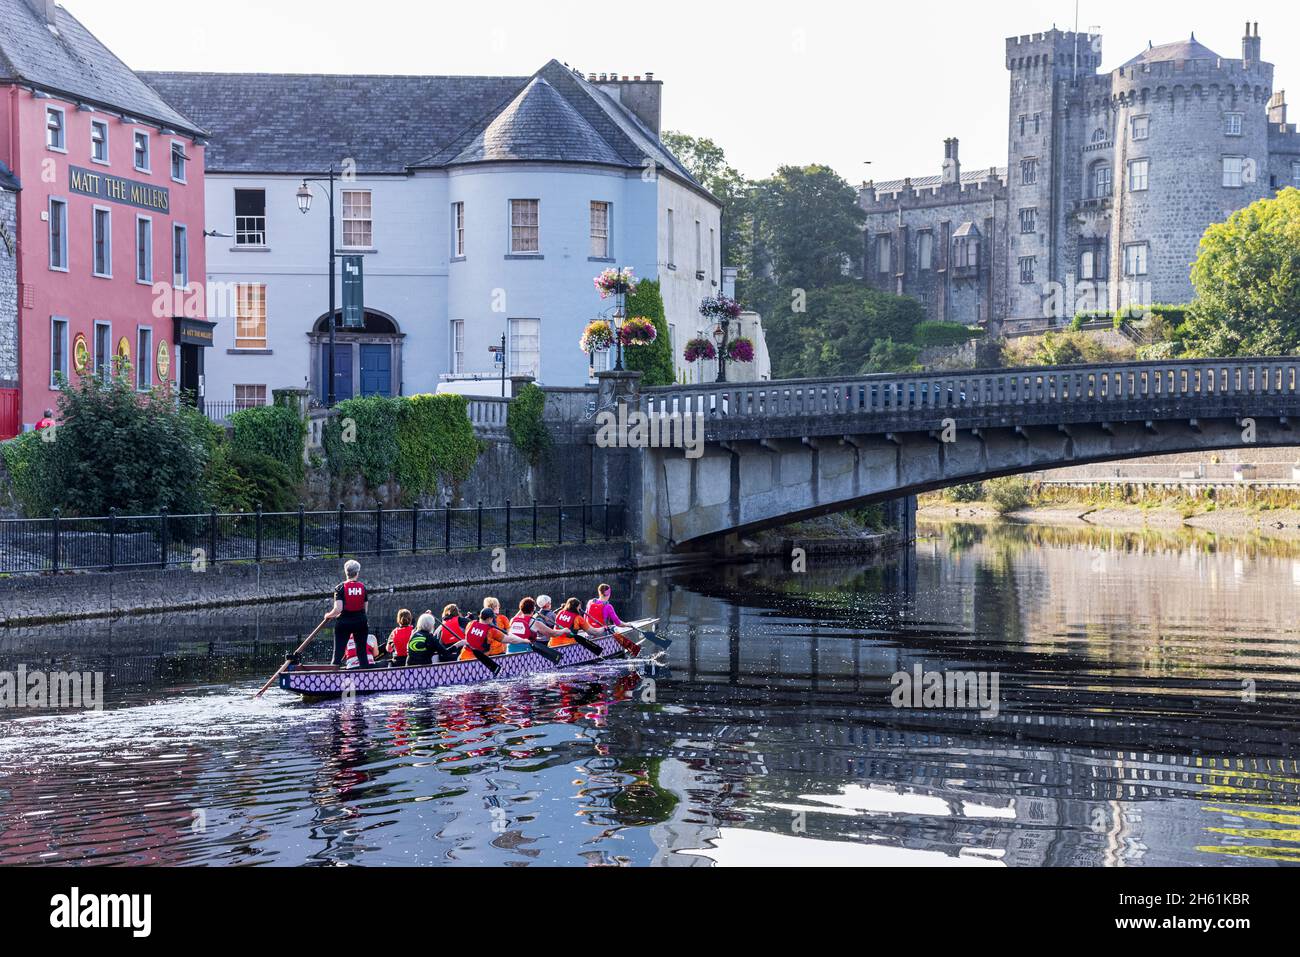 Dragon boat womens team training in their craft on the river Nore in Kilkenny, County Kilkenny, Ireland Stock Photo